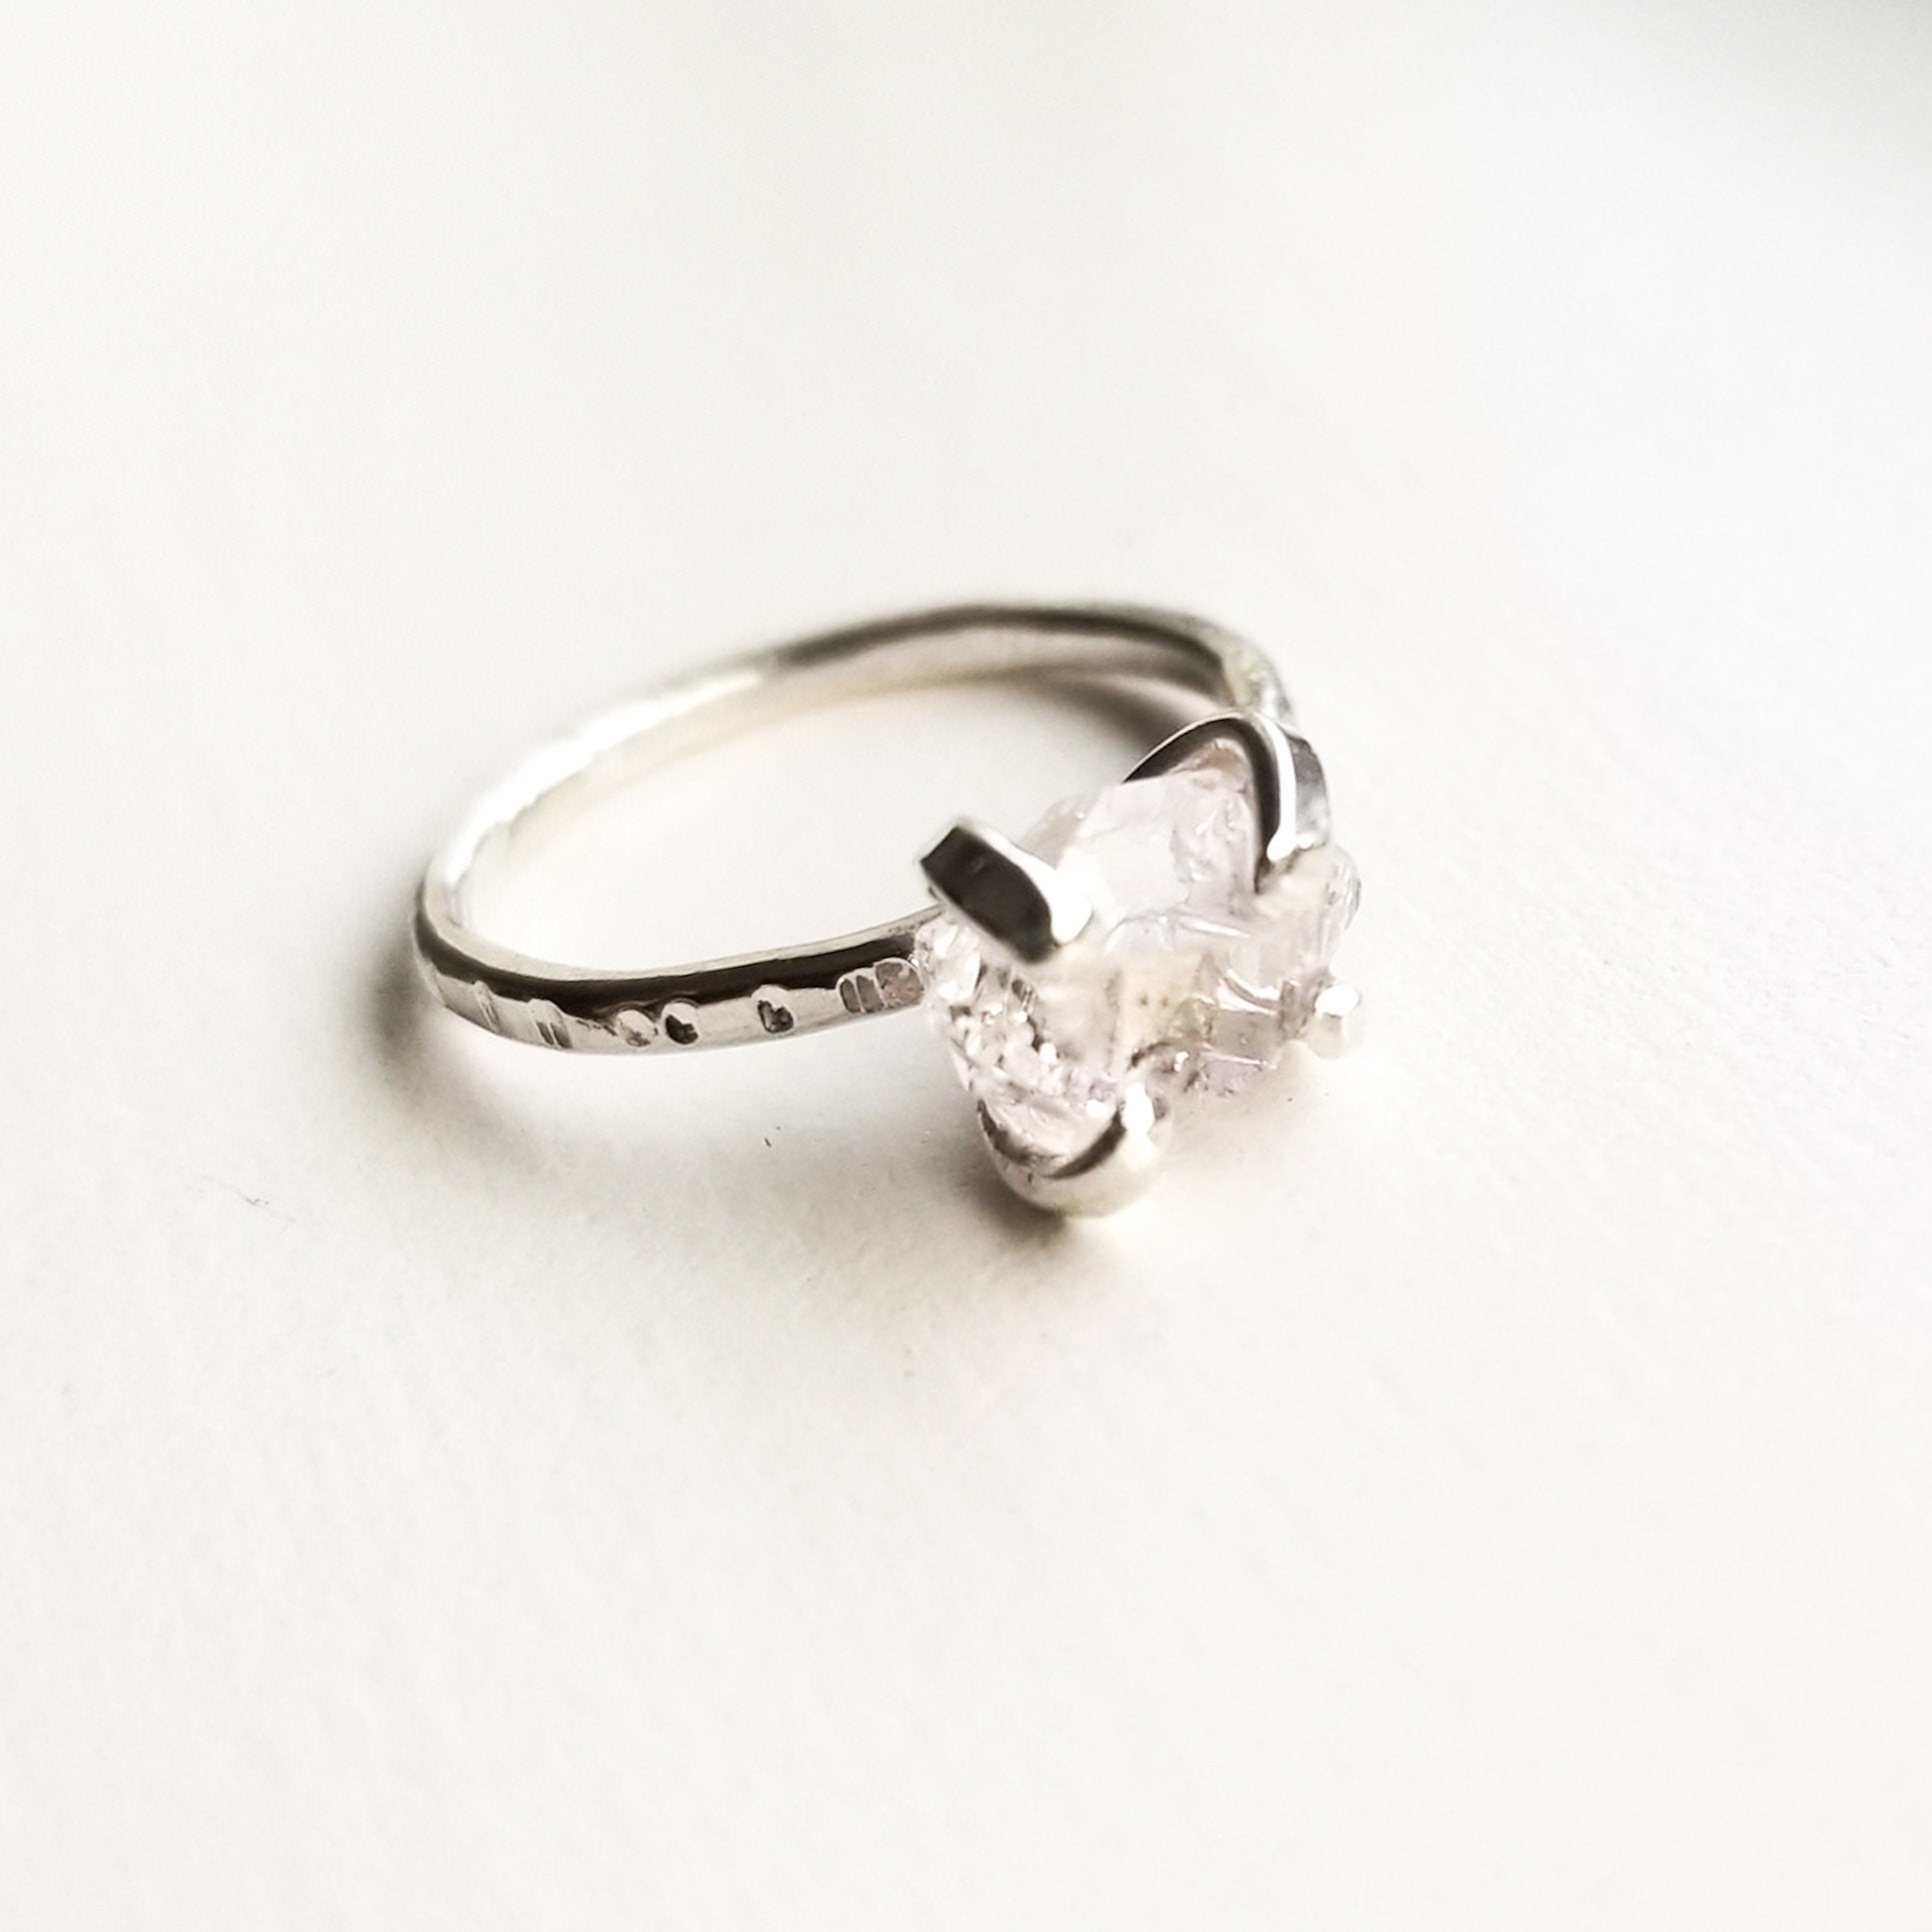 a silver claw style ring with a herkimer diamond on a white background